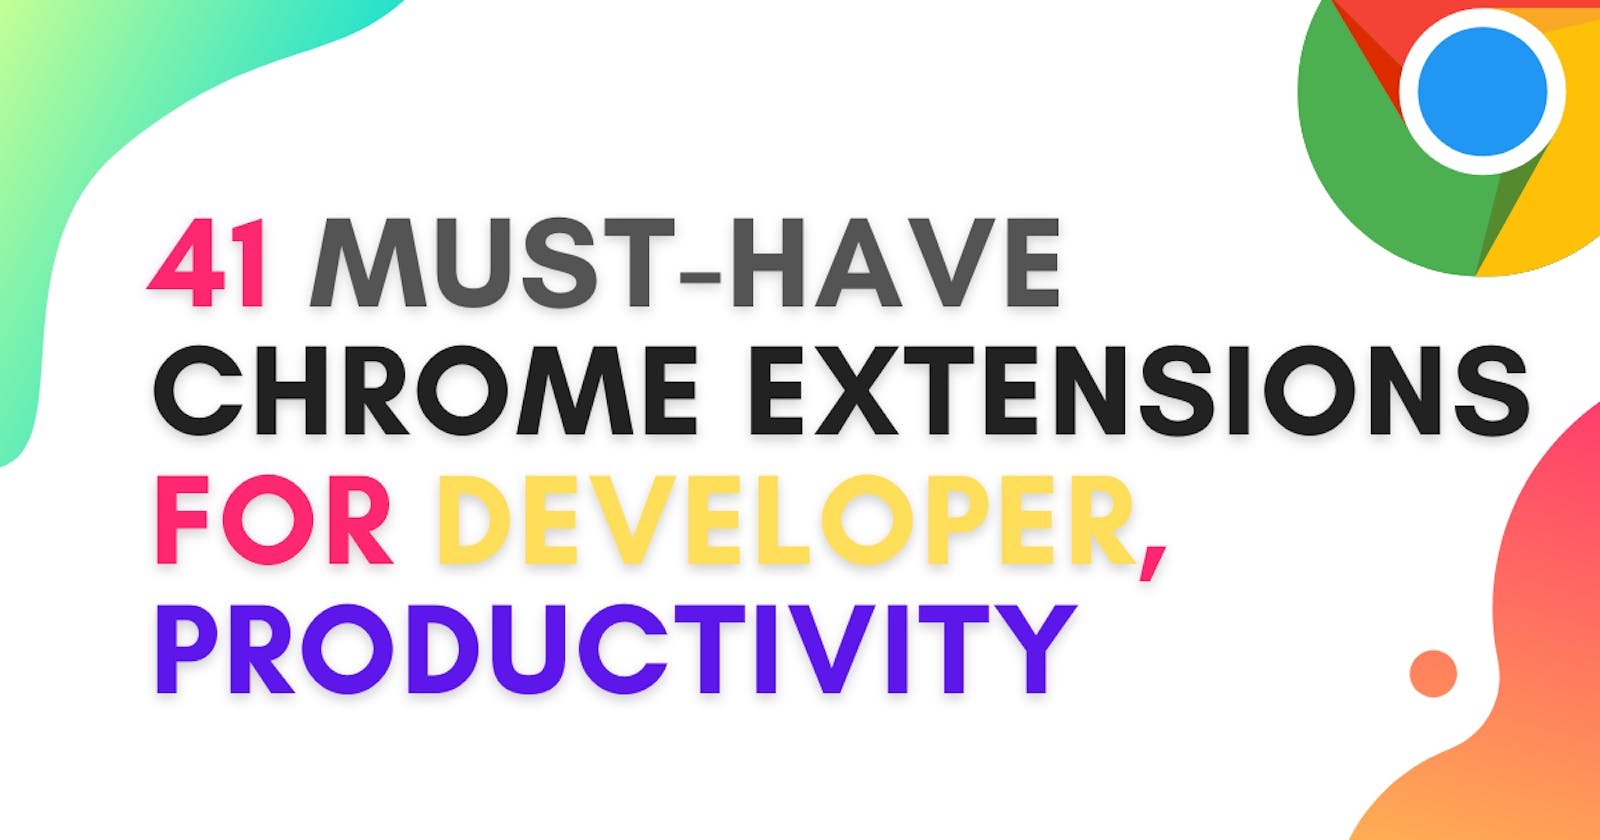 41 Must have chrome extensions for Developers and Productivity